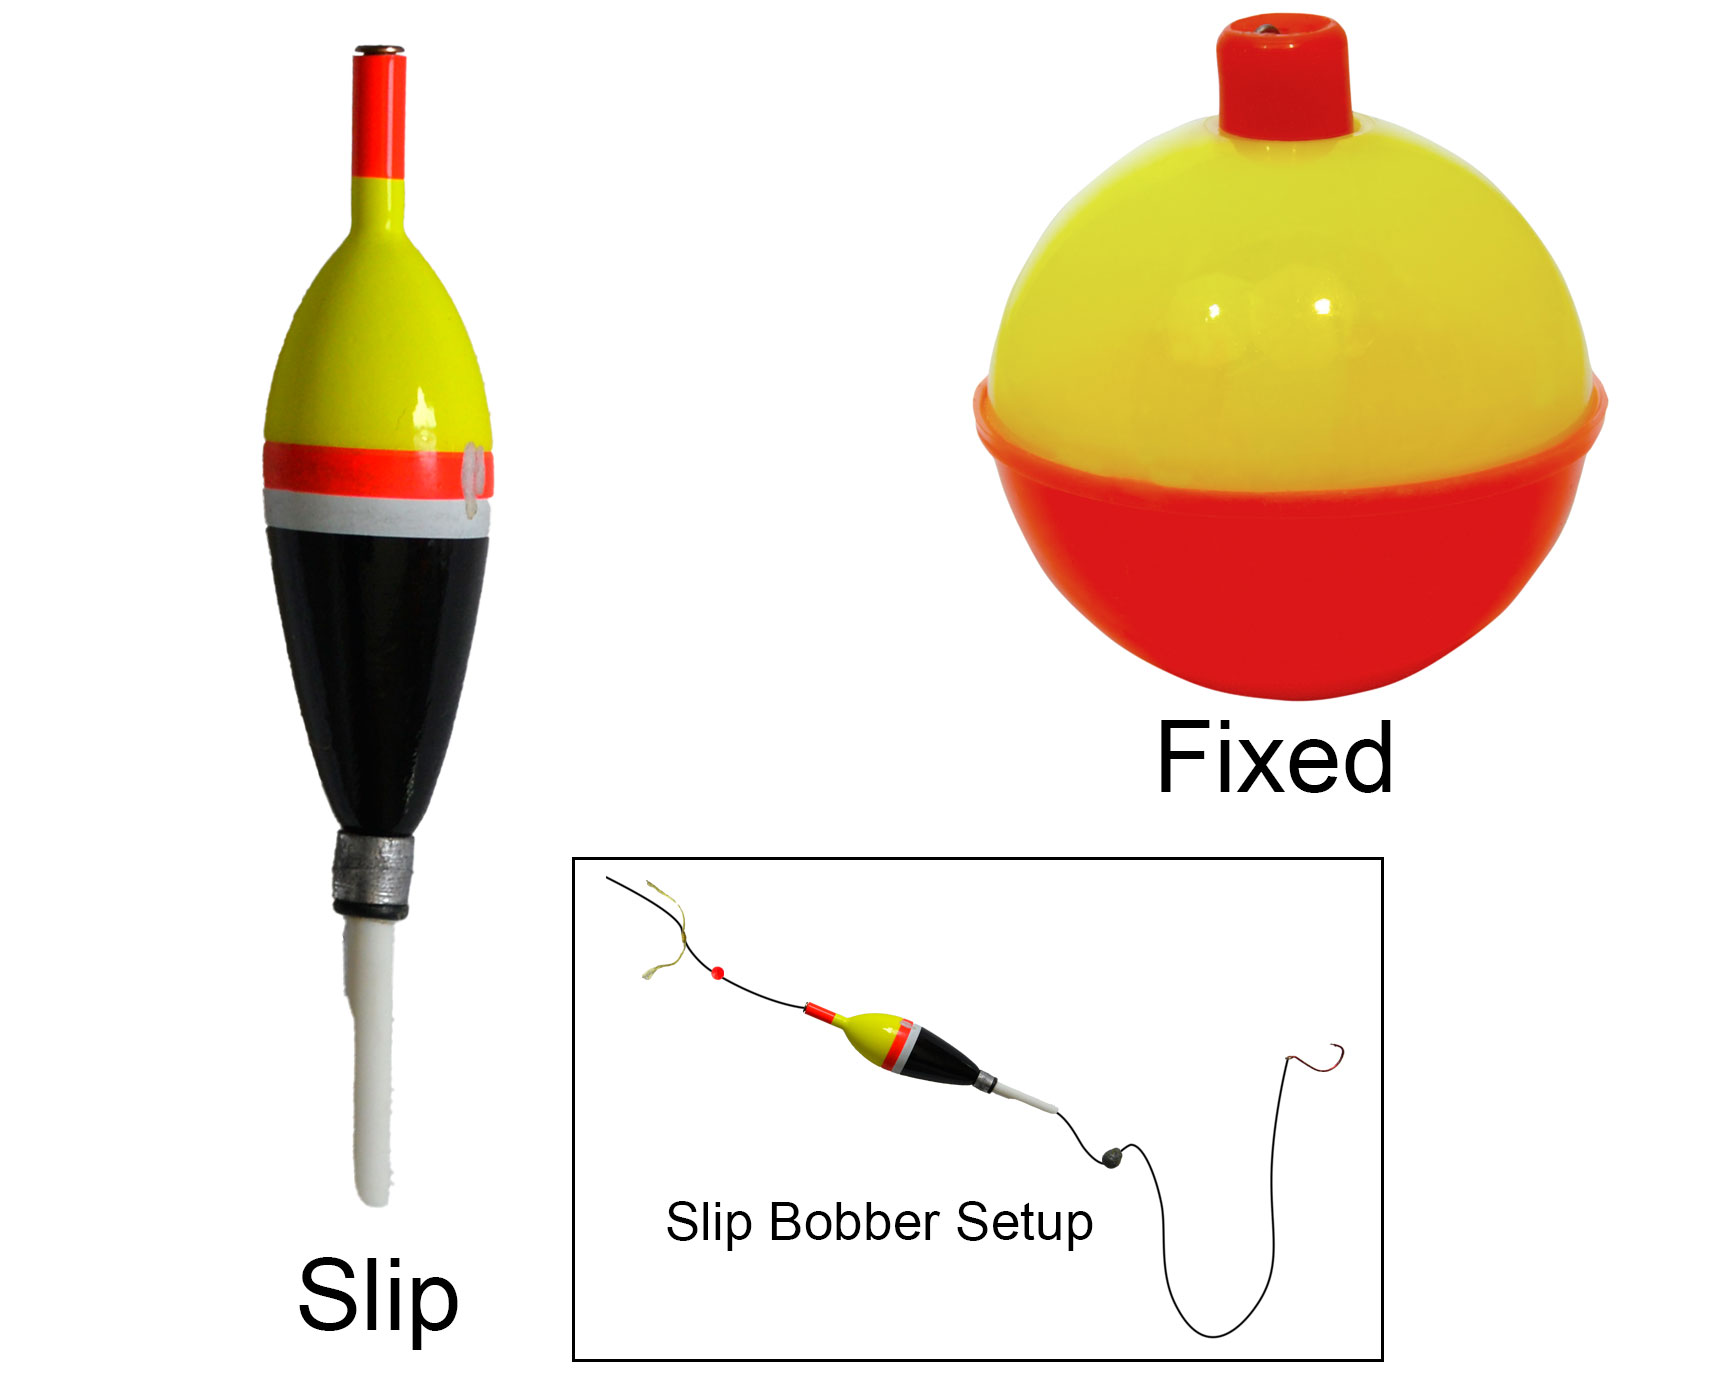 Slip and fixed bobber examples